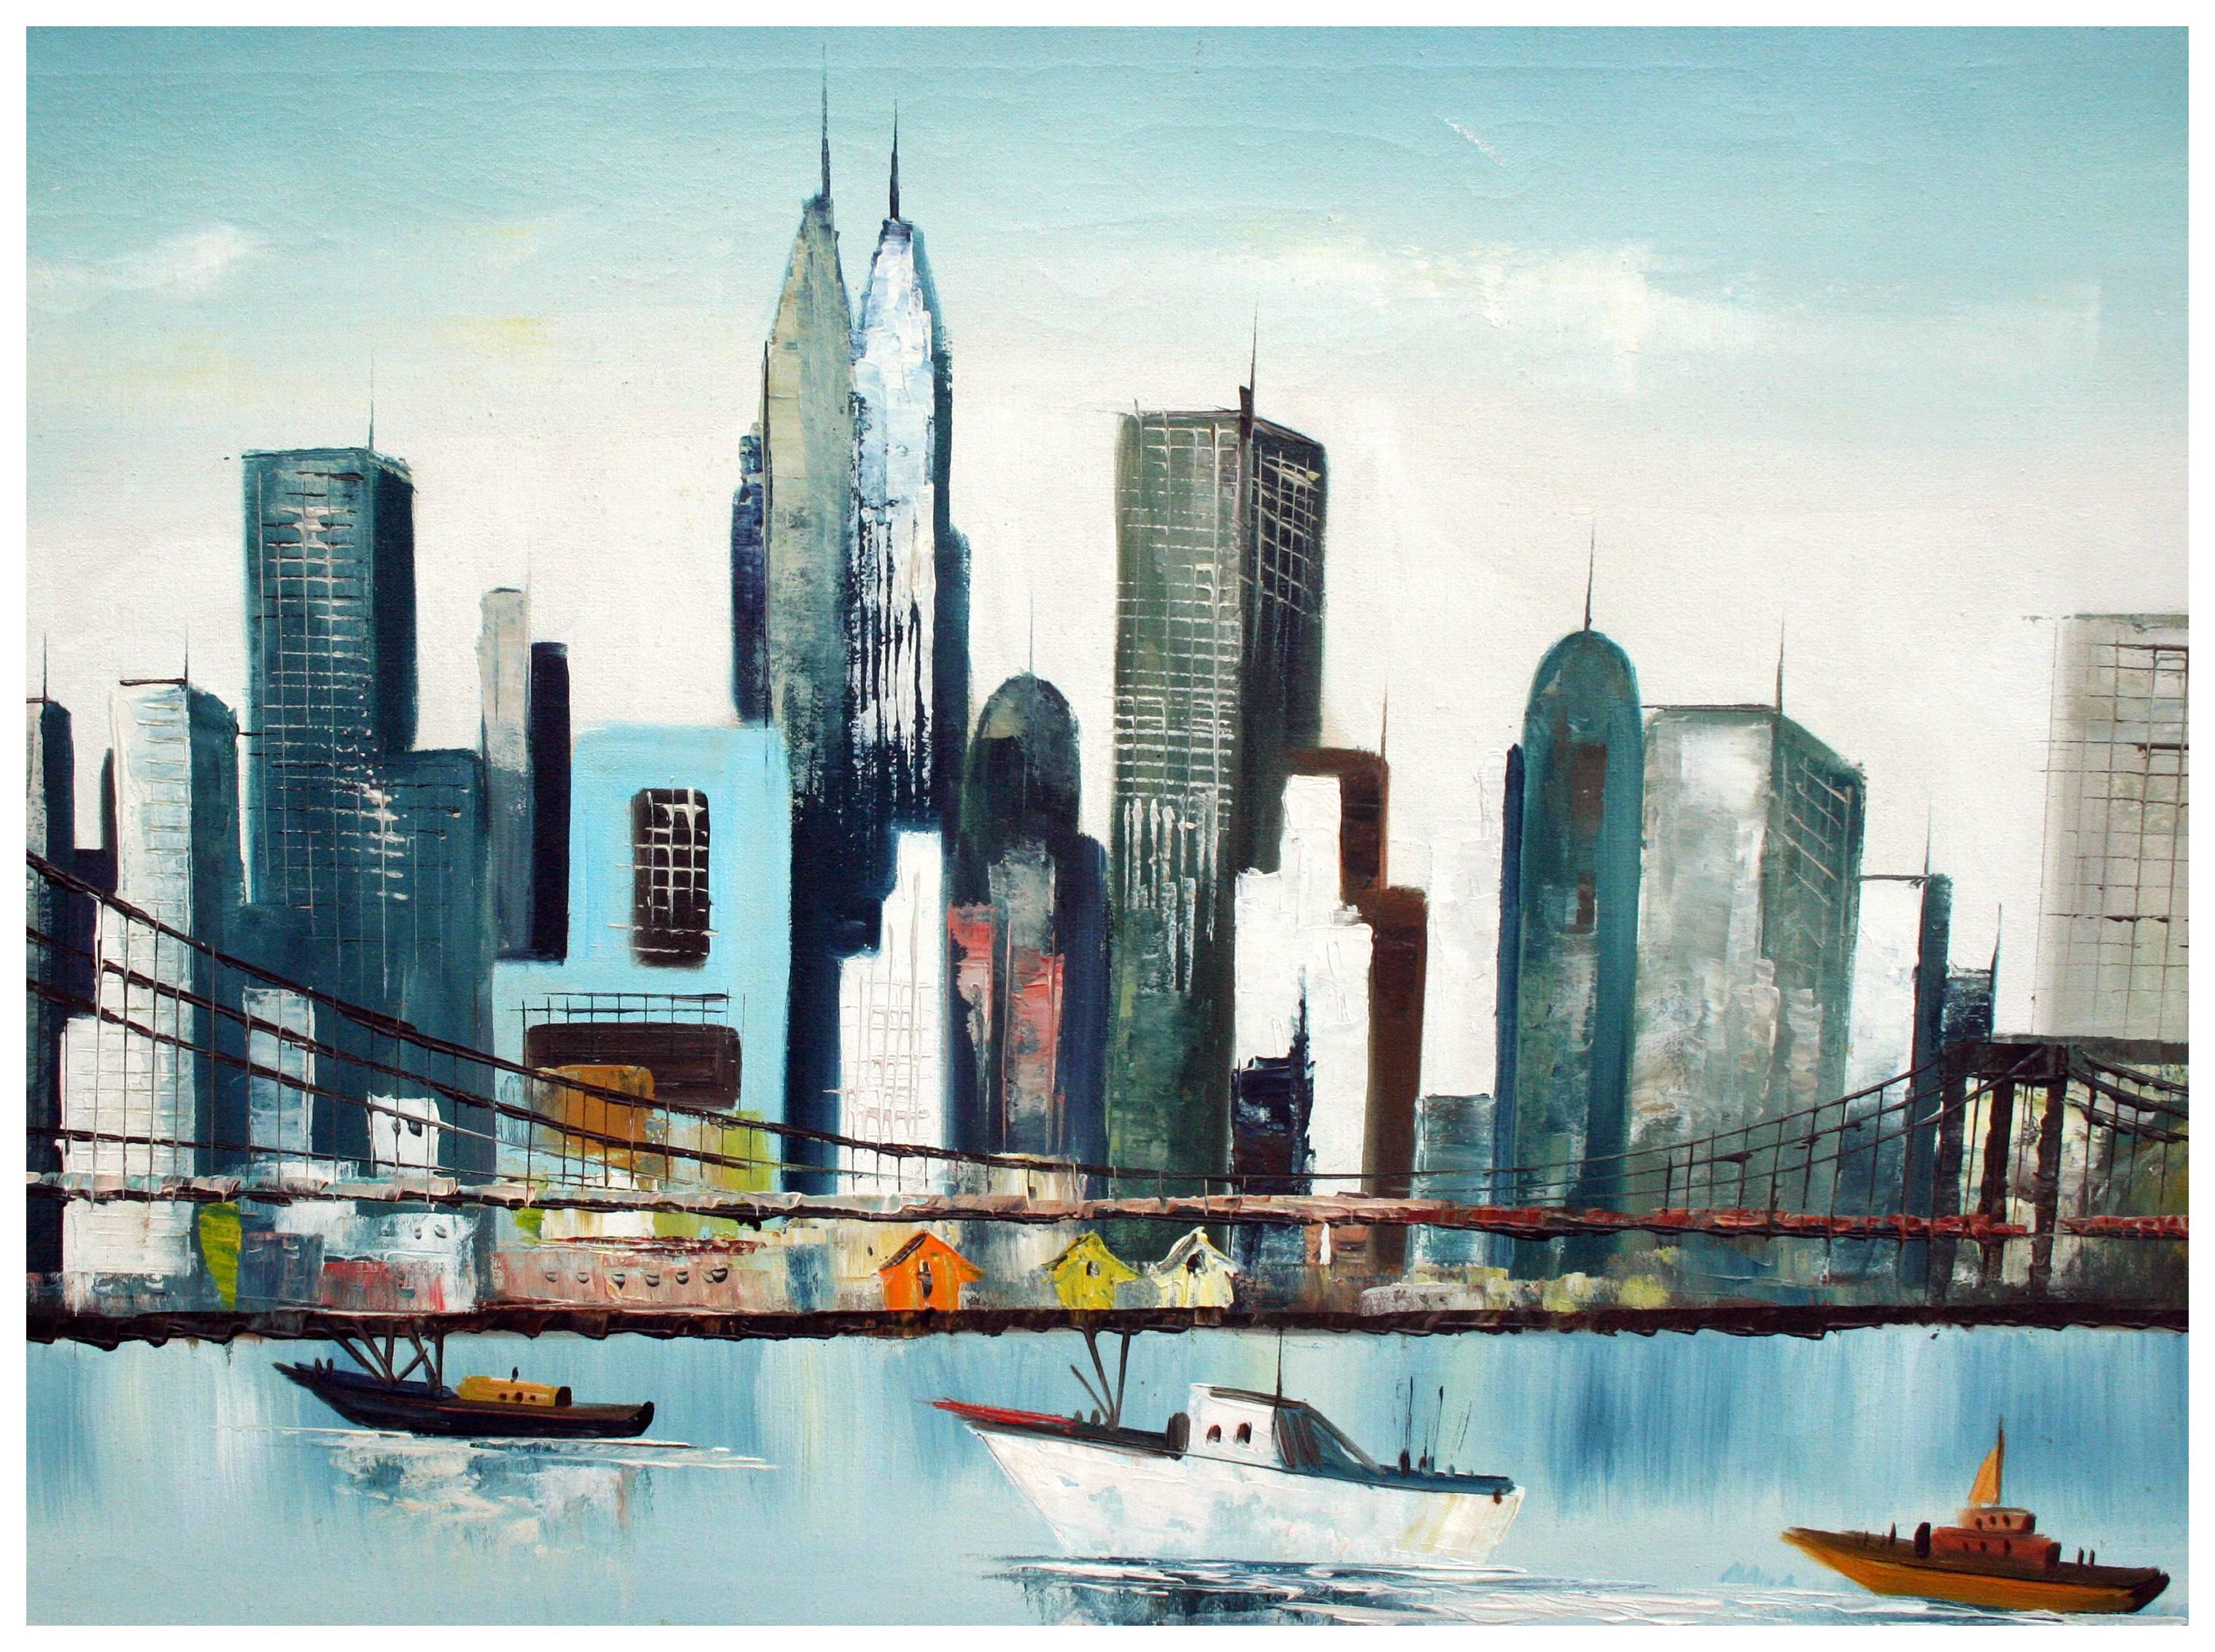 A bright naive oil painting showing a view of boats with the Brooklyn Bridge in the foreground and New York in the background. Louis Stanio is a painter of European romantic street scenes and American cityscapes. Signed lower right 